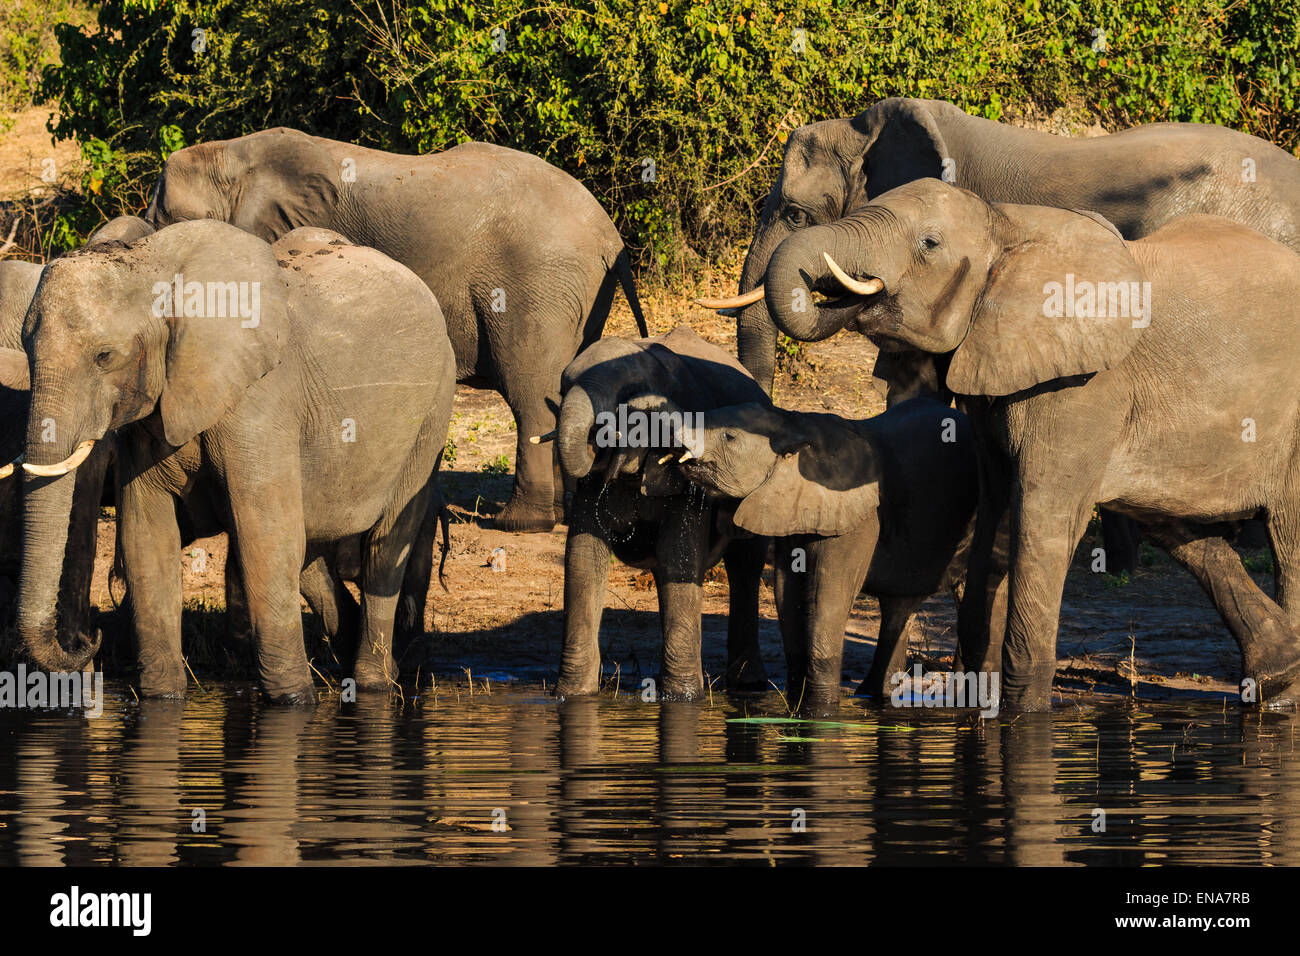 Group and baby elephant drinking river Chobe Botswana Africa. Adorable and cute scene. Stock Photo